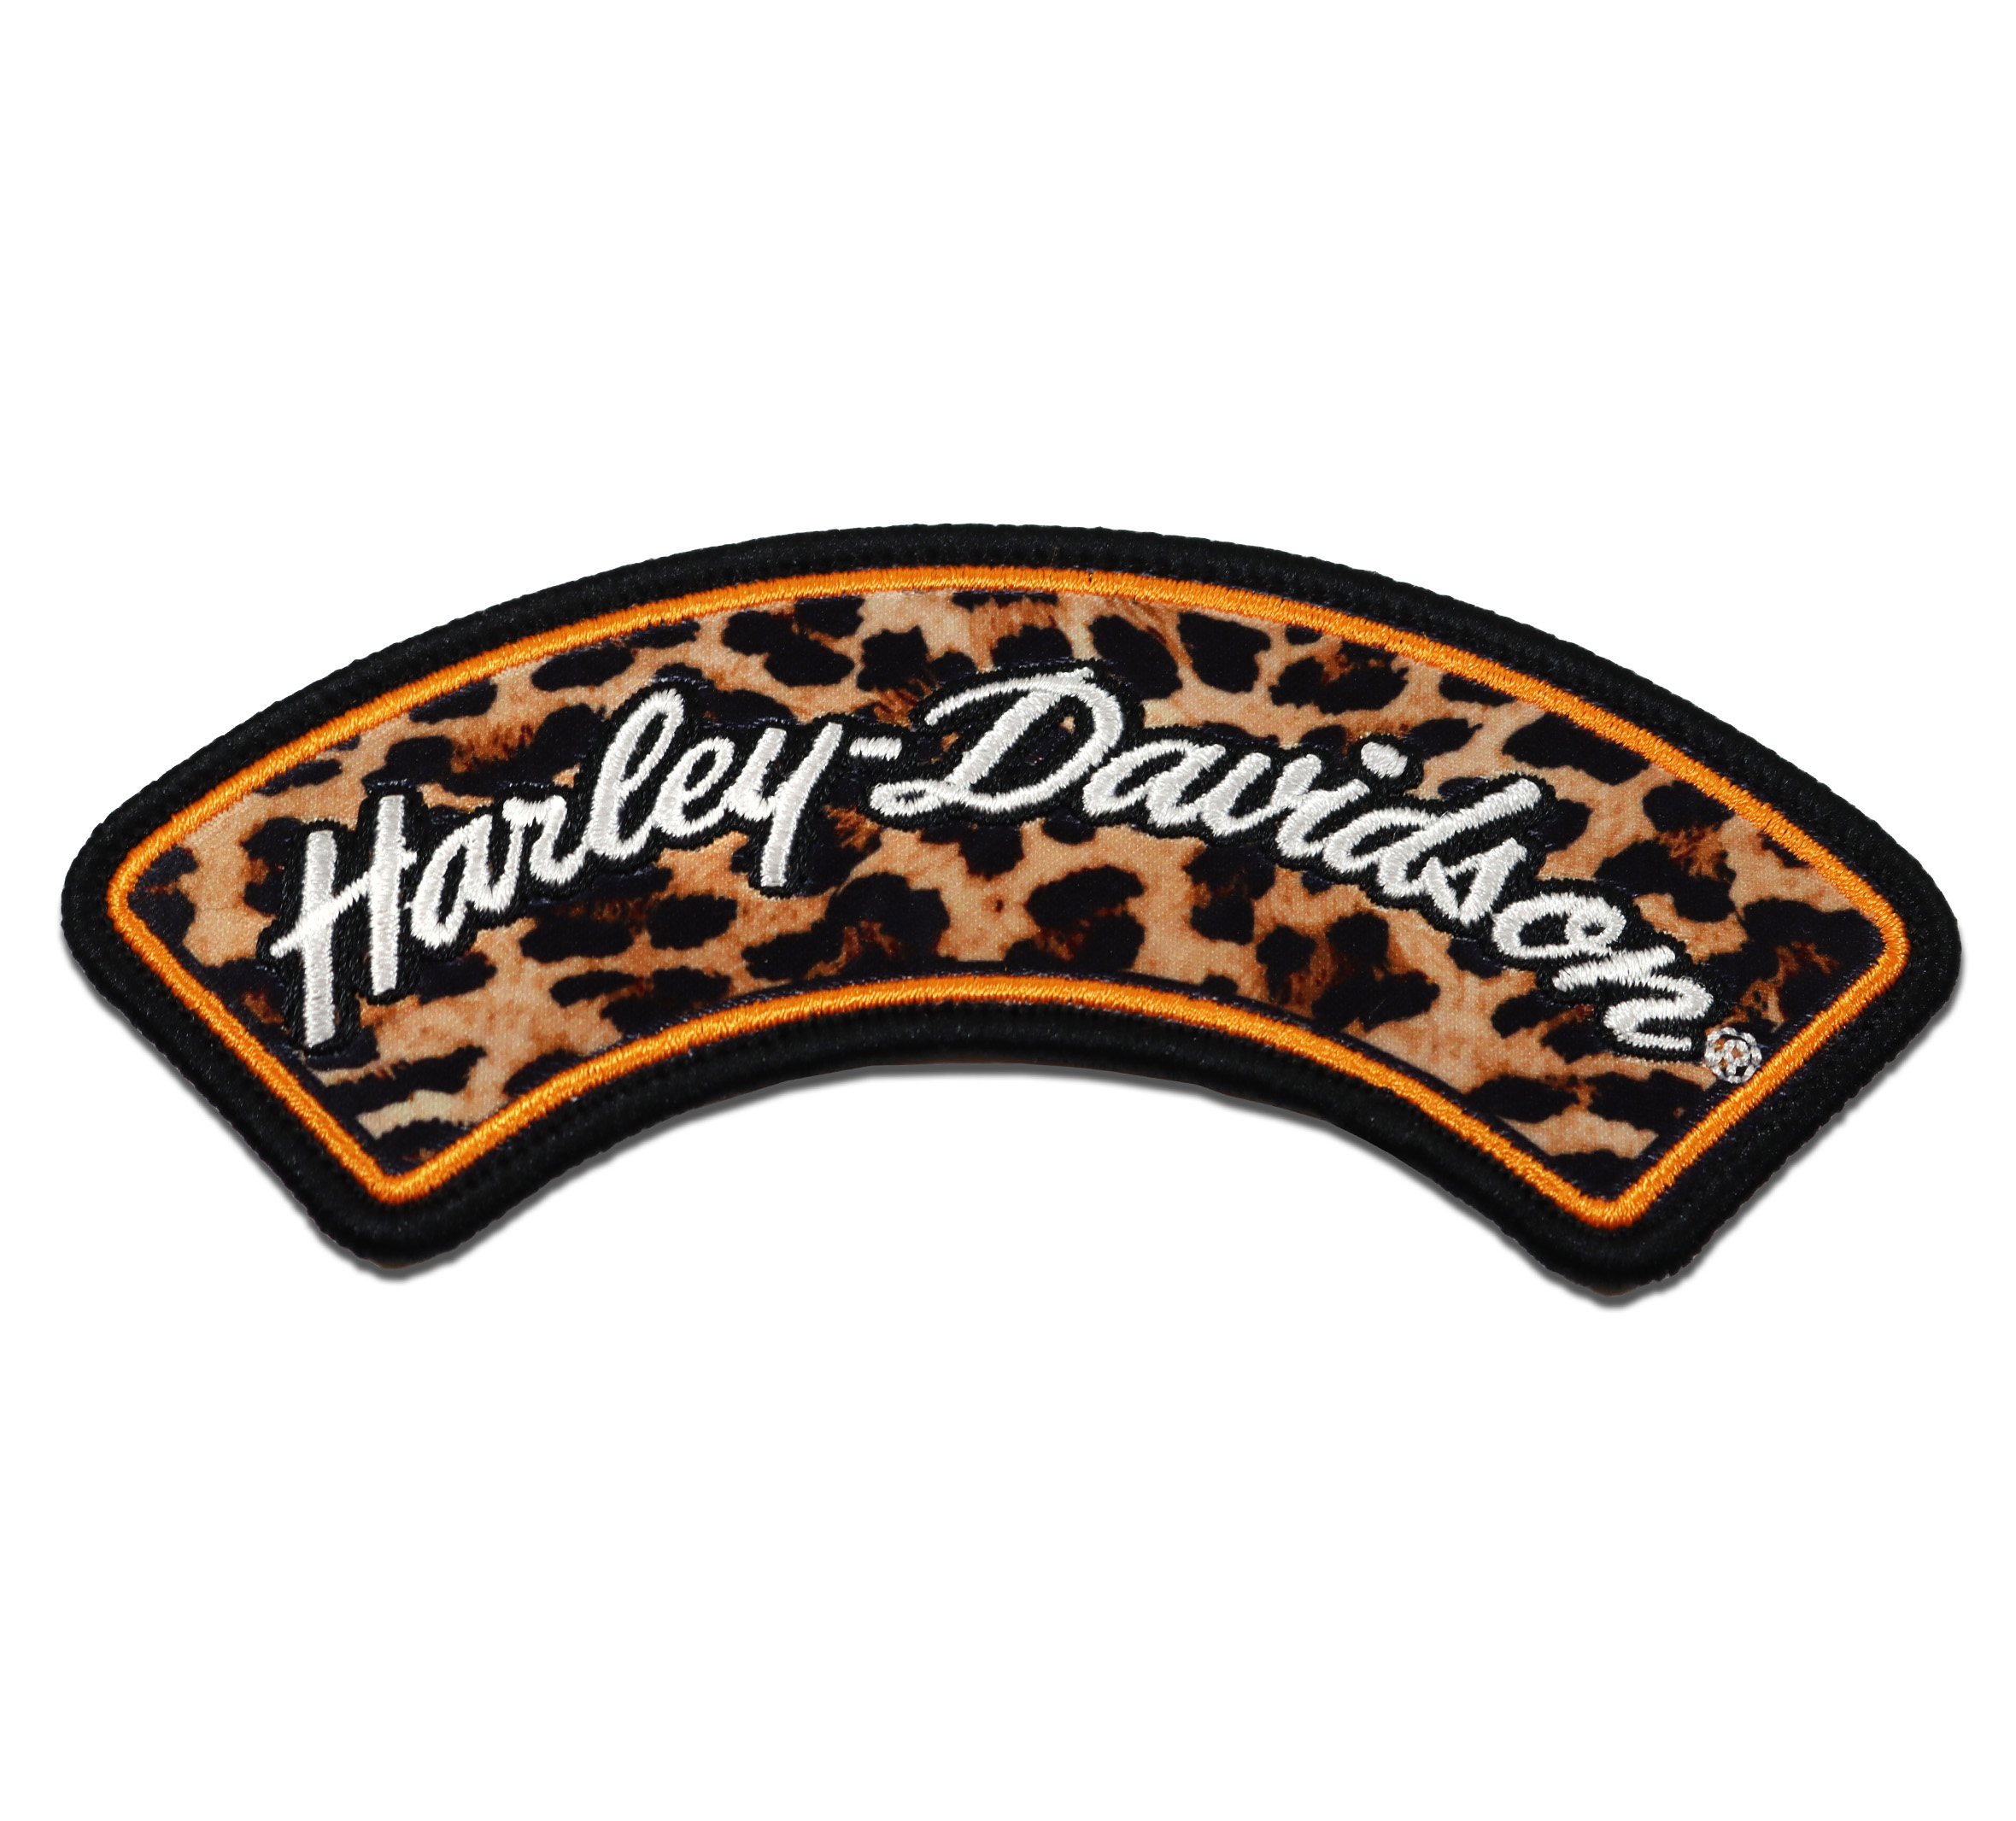 Harley-Davidson Motorcycles. Authentic Vintage Patch – Megadeluxe